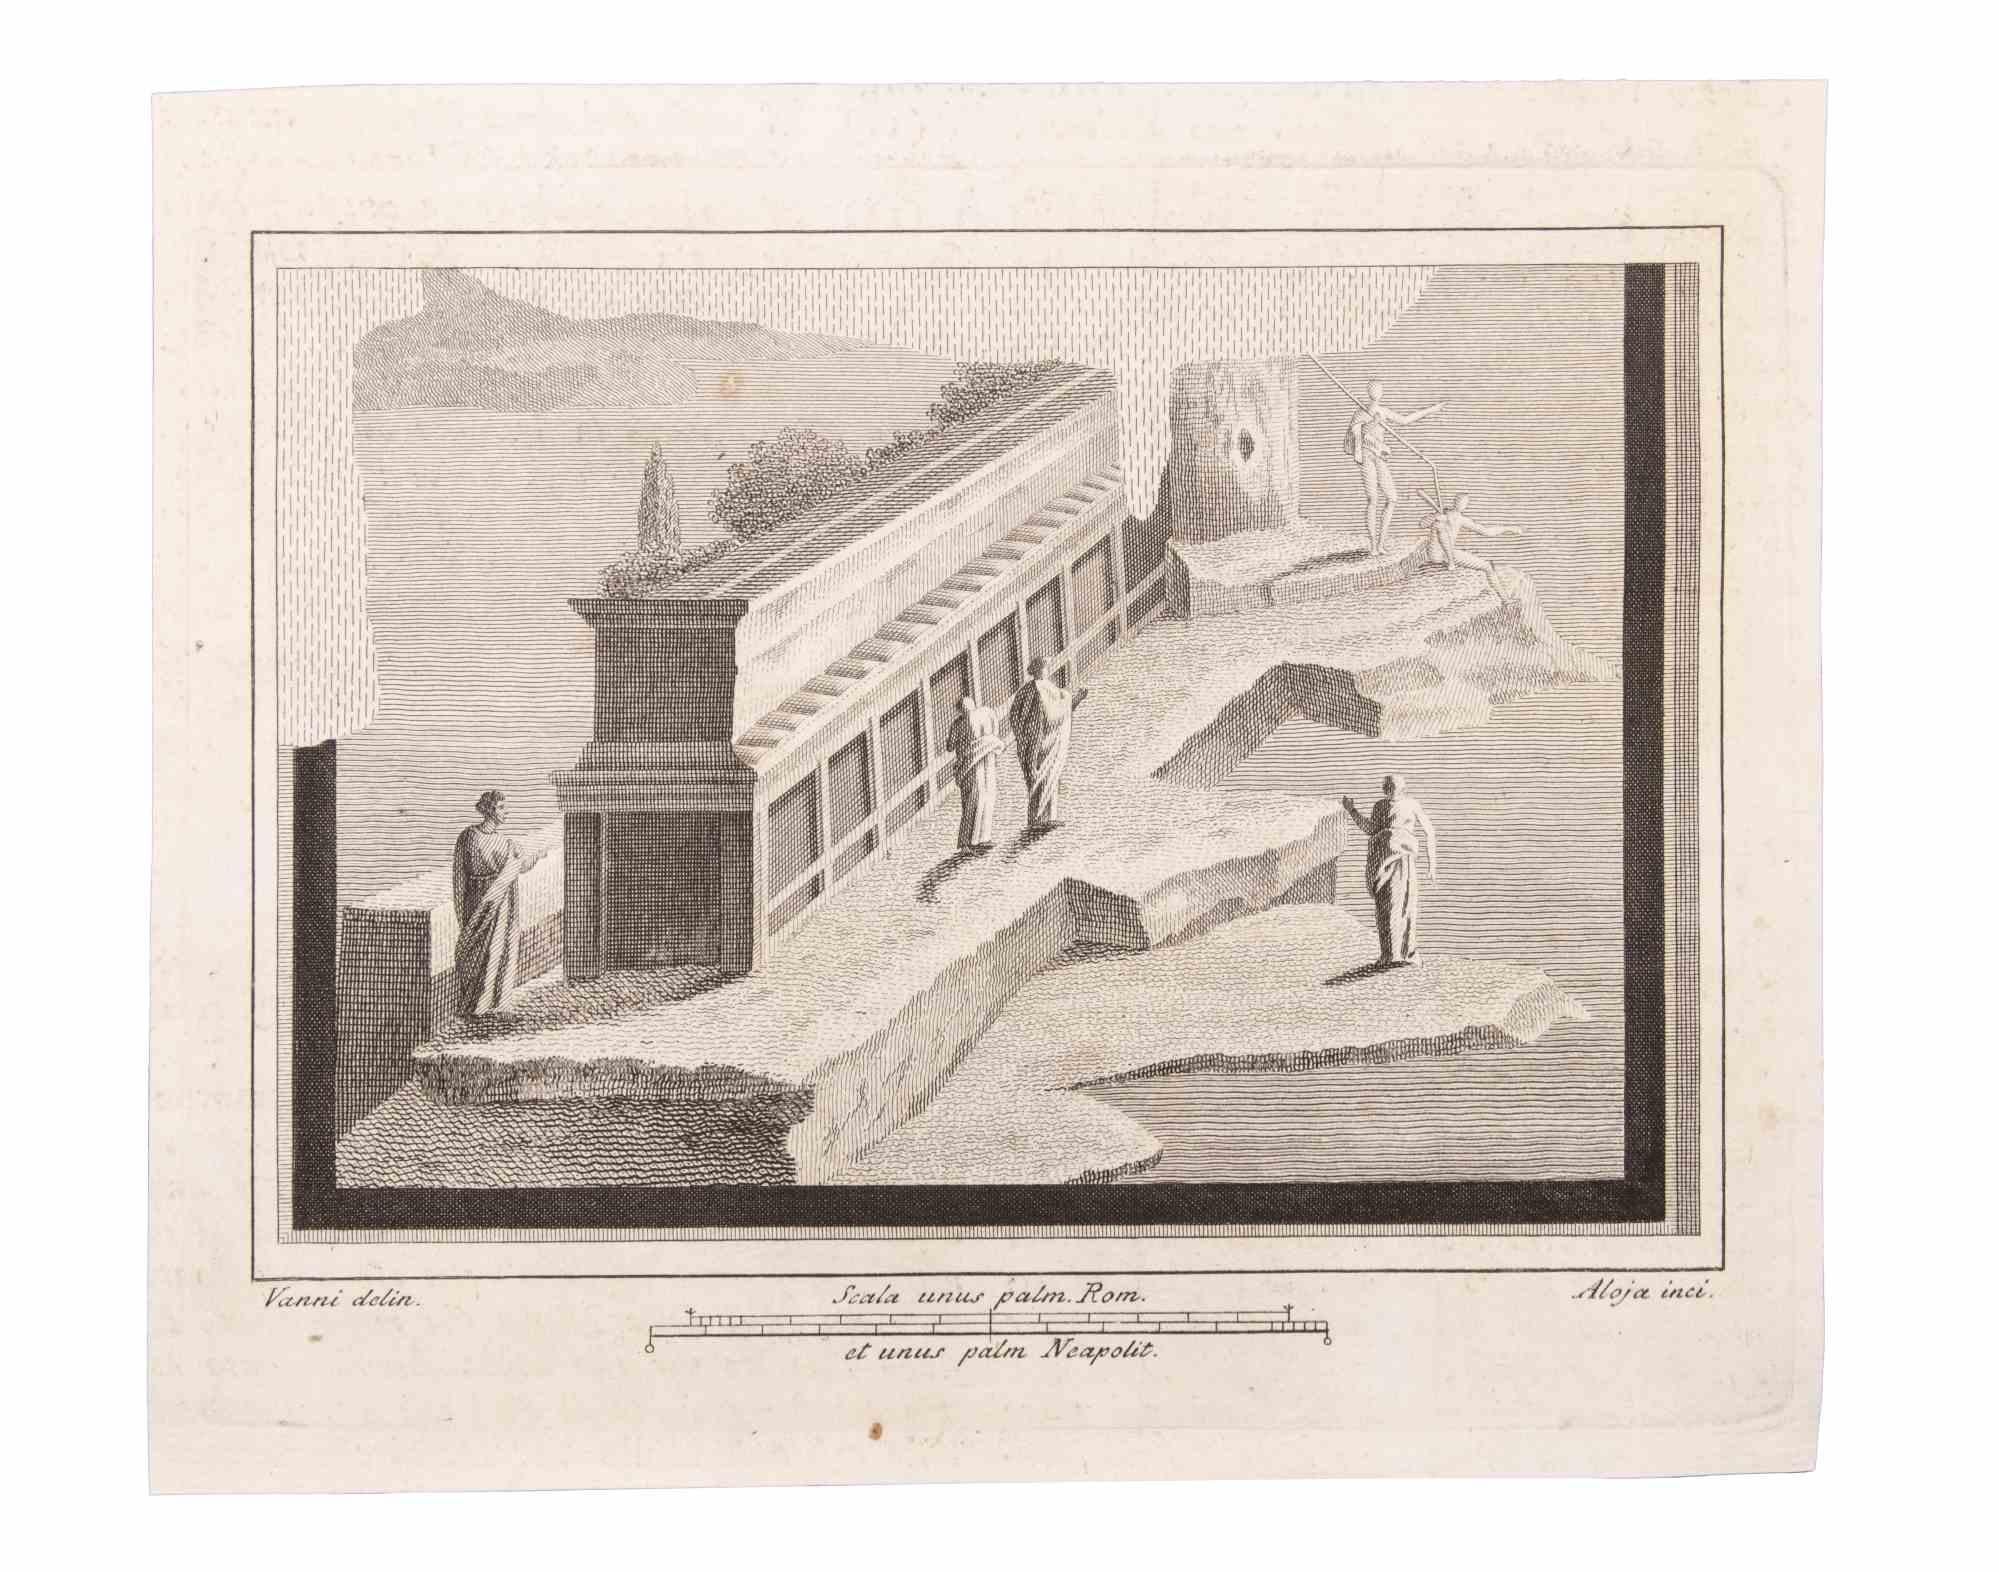 Monument With Figures is an Etching realized by  Luigi Aloja (1783-1837).

The etching belongs to the print suite “Antiquities of Herculaneum Exposed” (original title: “Le Antichità di Ercolano Esposte”), an eight-volume volume of engravings of the